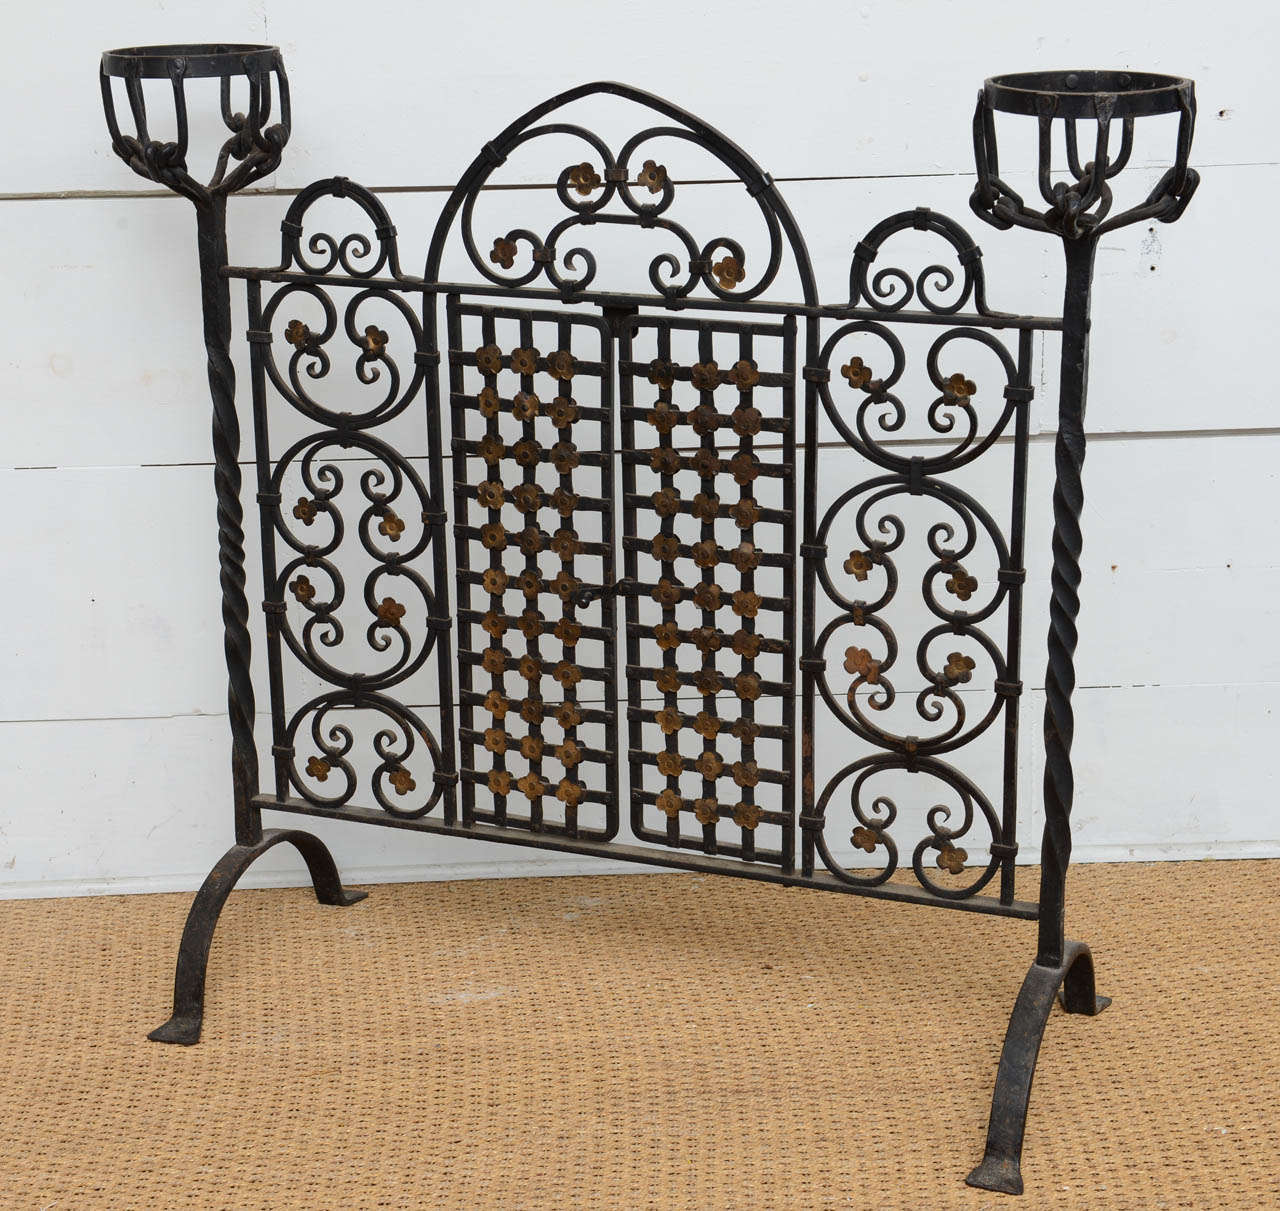 Wrought and forged iron firescreen with gates for fireplace access. Florets highlighted in gold